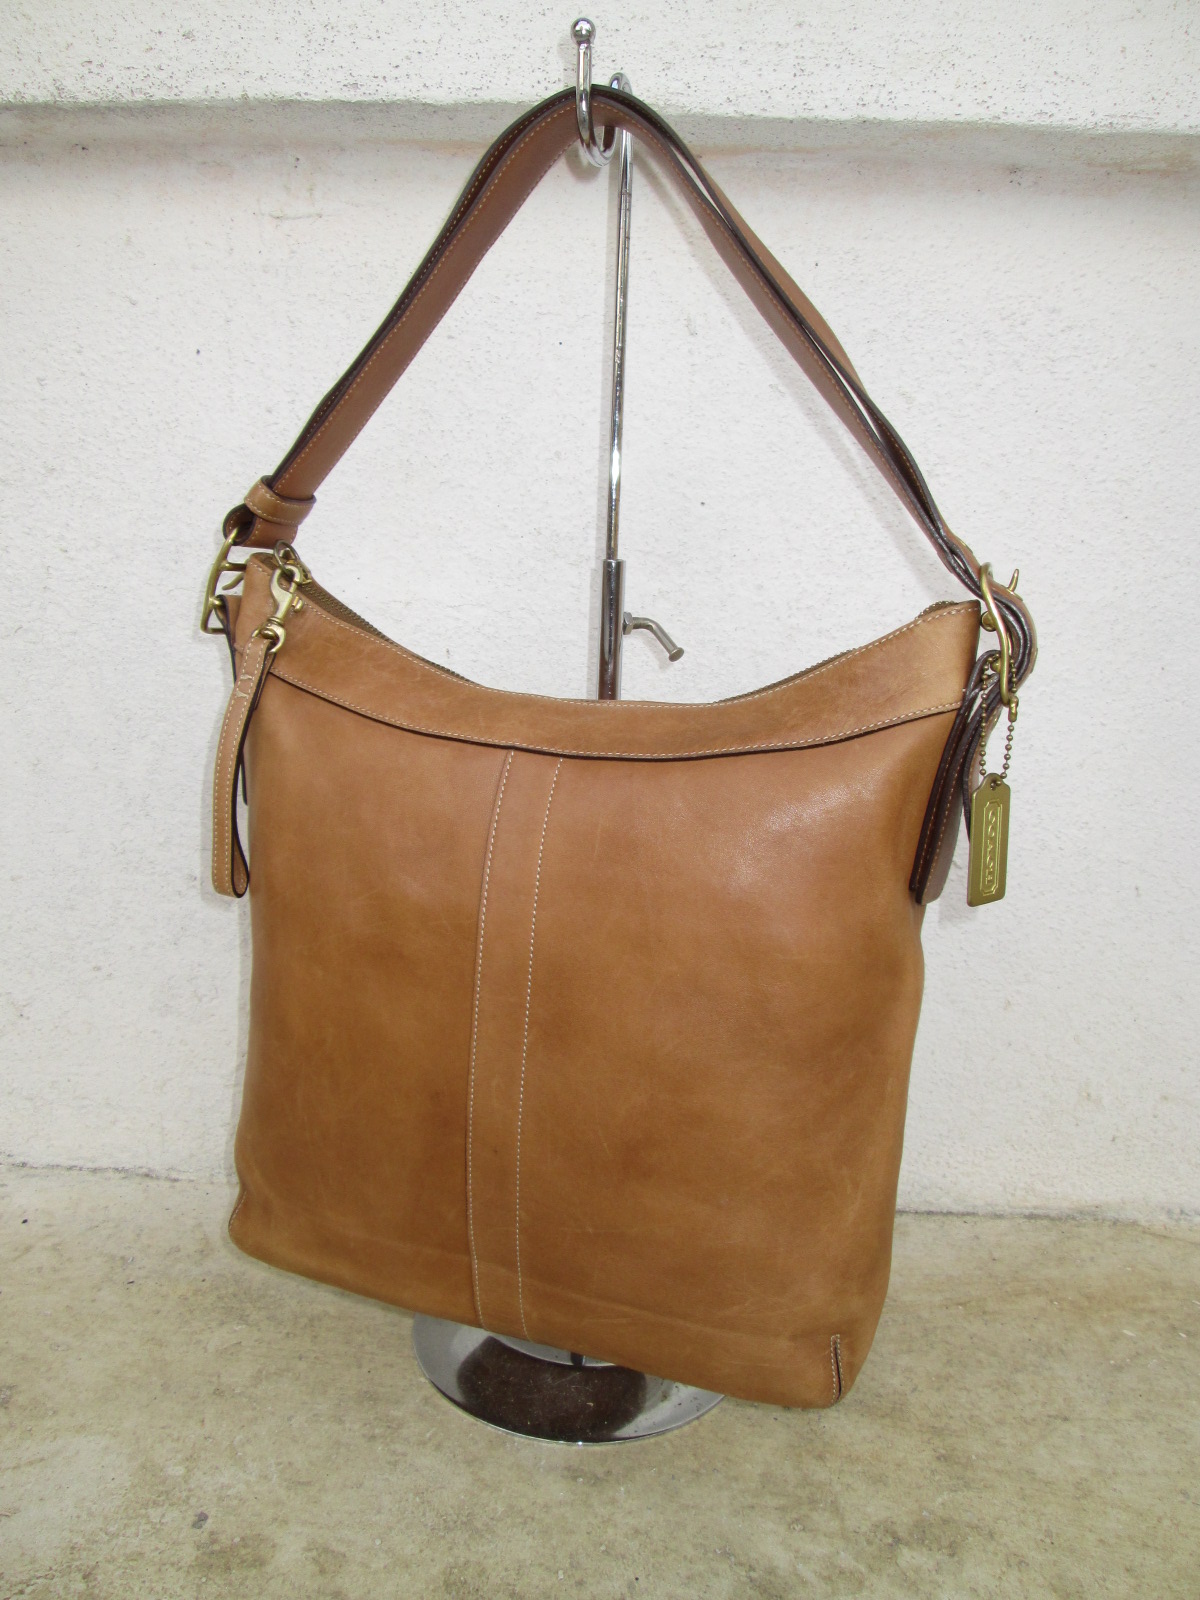 d0rayakEEbaG: Authentic Coach Brown Leather Shoulder/Sling Bag(SOLD)